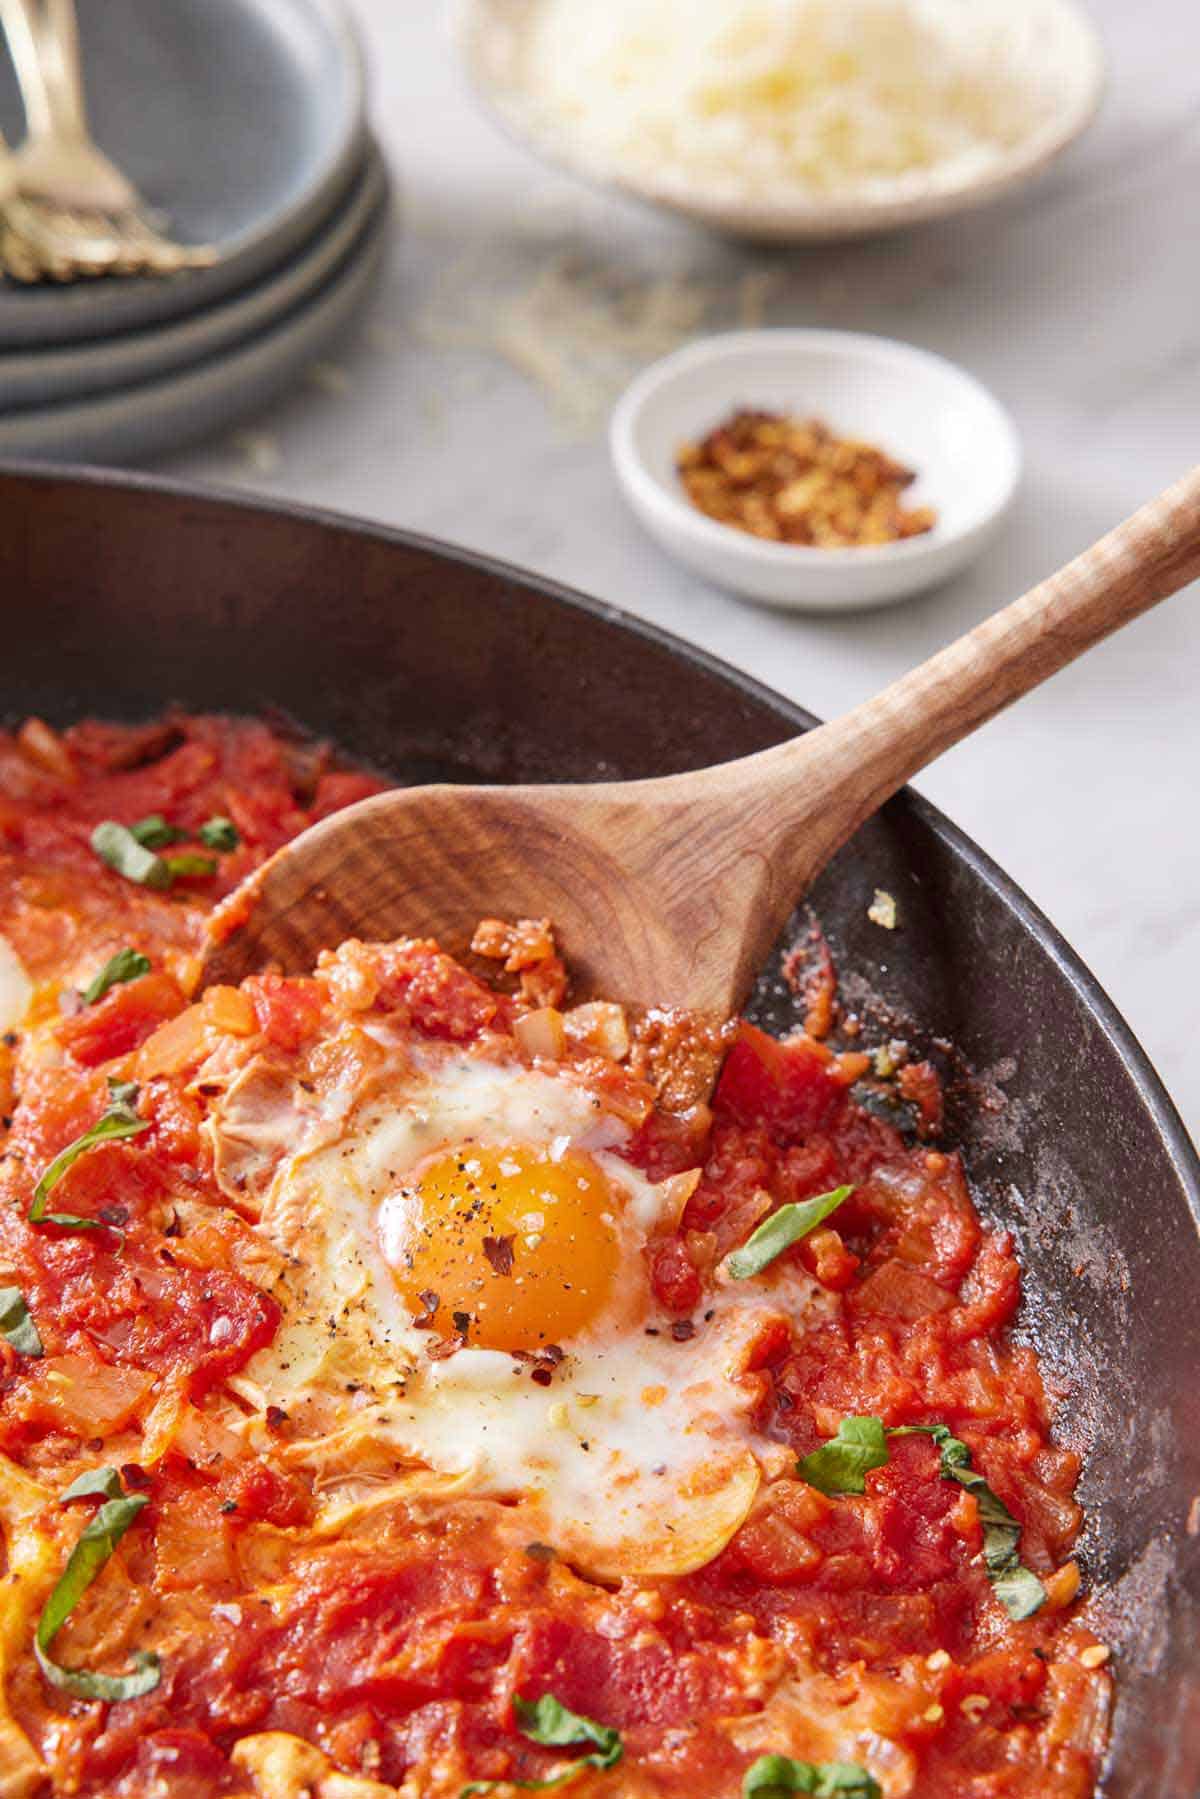 A spoon scooping up eggs in purgatory in a skillet. Bowl of red pepper flakes and shredded cheese in the background.